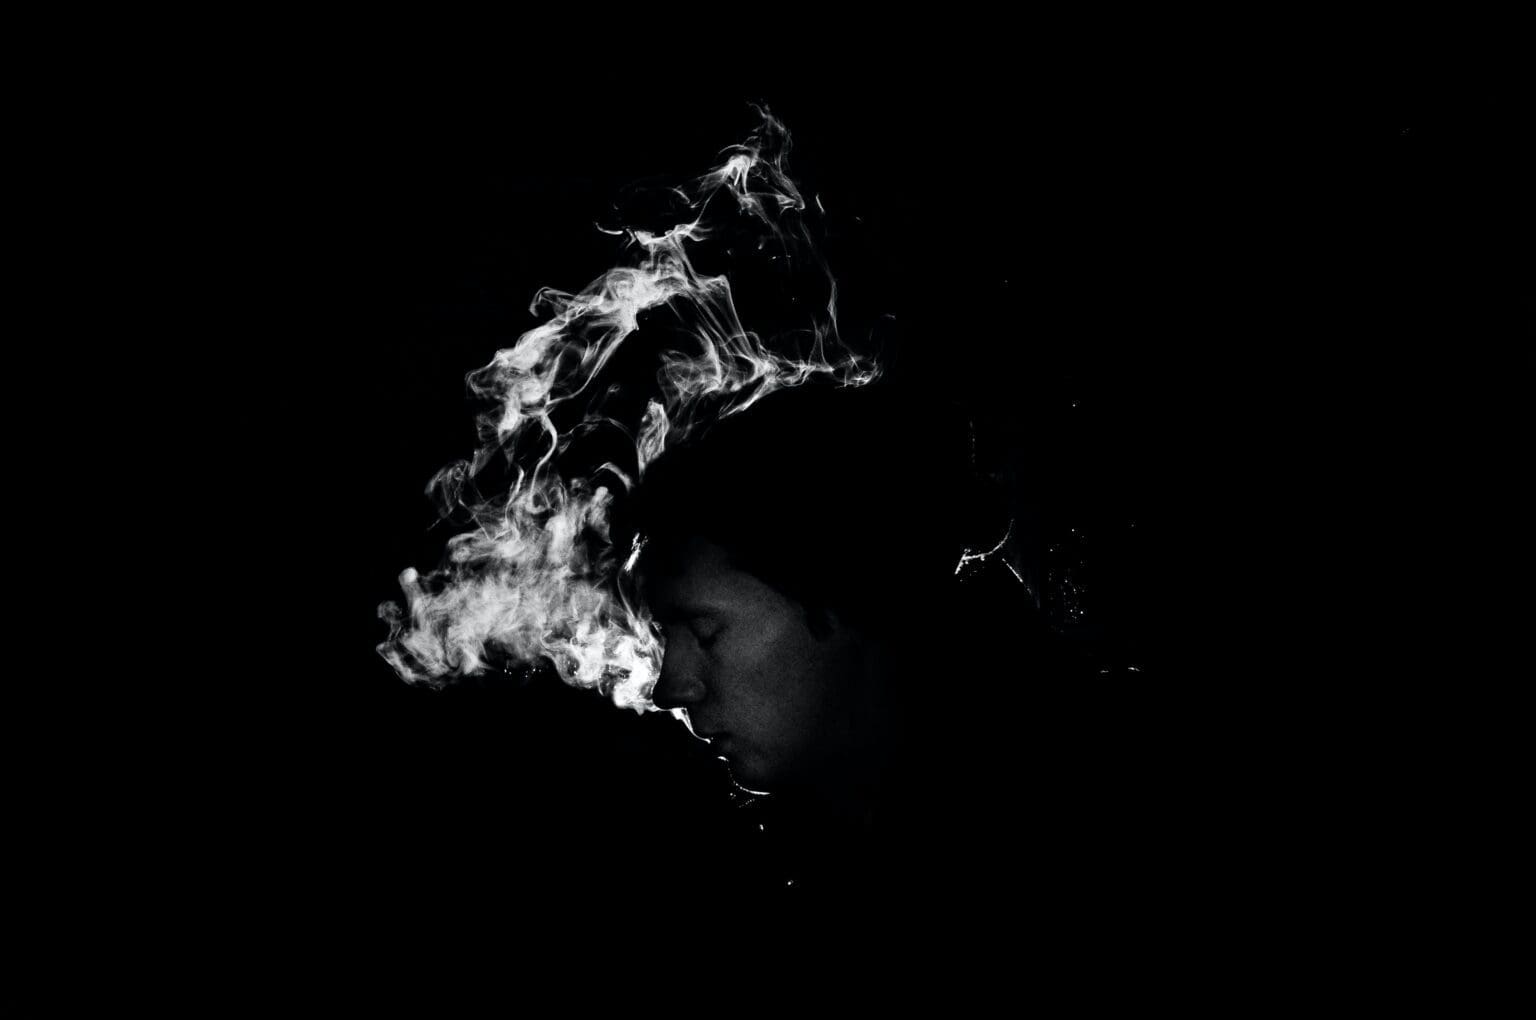 A monochrome image of a person exhaling smoke, creating a swirling pattern against a dark background.